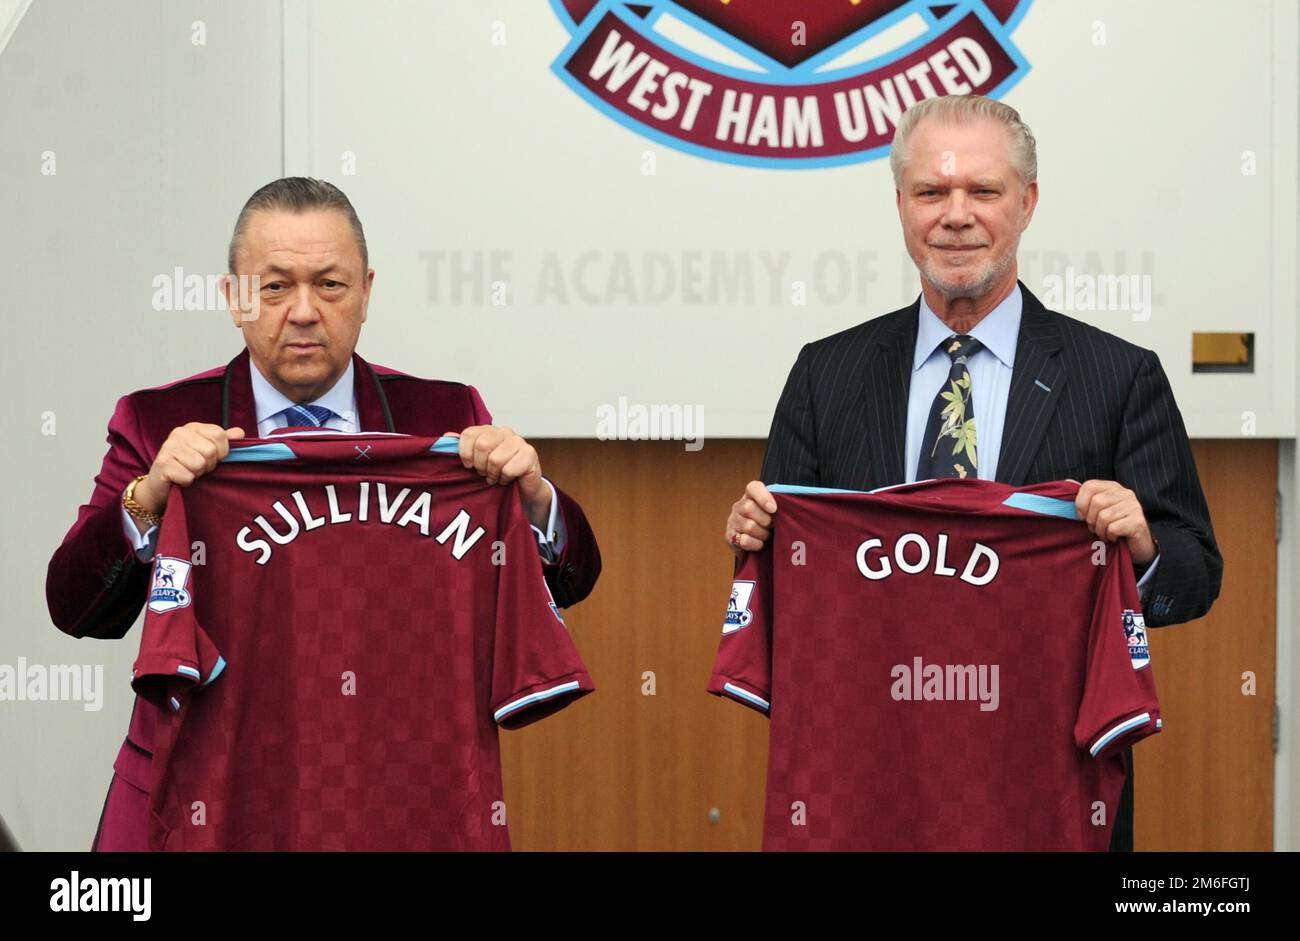 File photo dated 19-01-2010 of David Sullivan (left) and David Gold. West Ham joint-chairman David Gold has died aged 86 following a “short illness”, the Premier League club have announced. Issue date: Wednesday January 4, 2023. Stock Photo